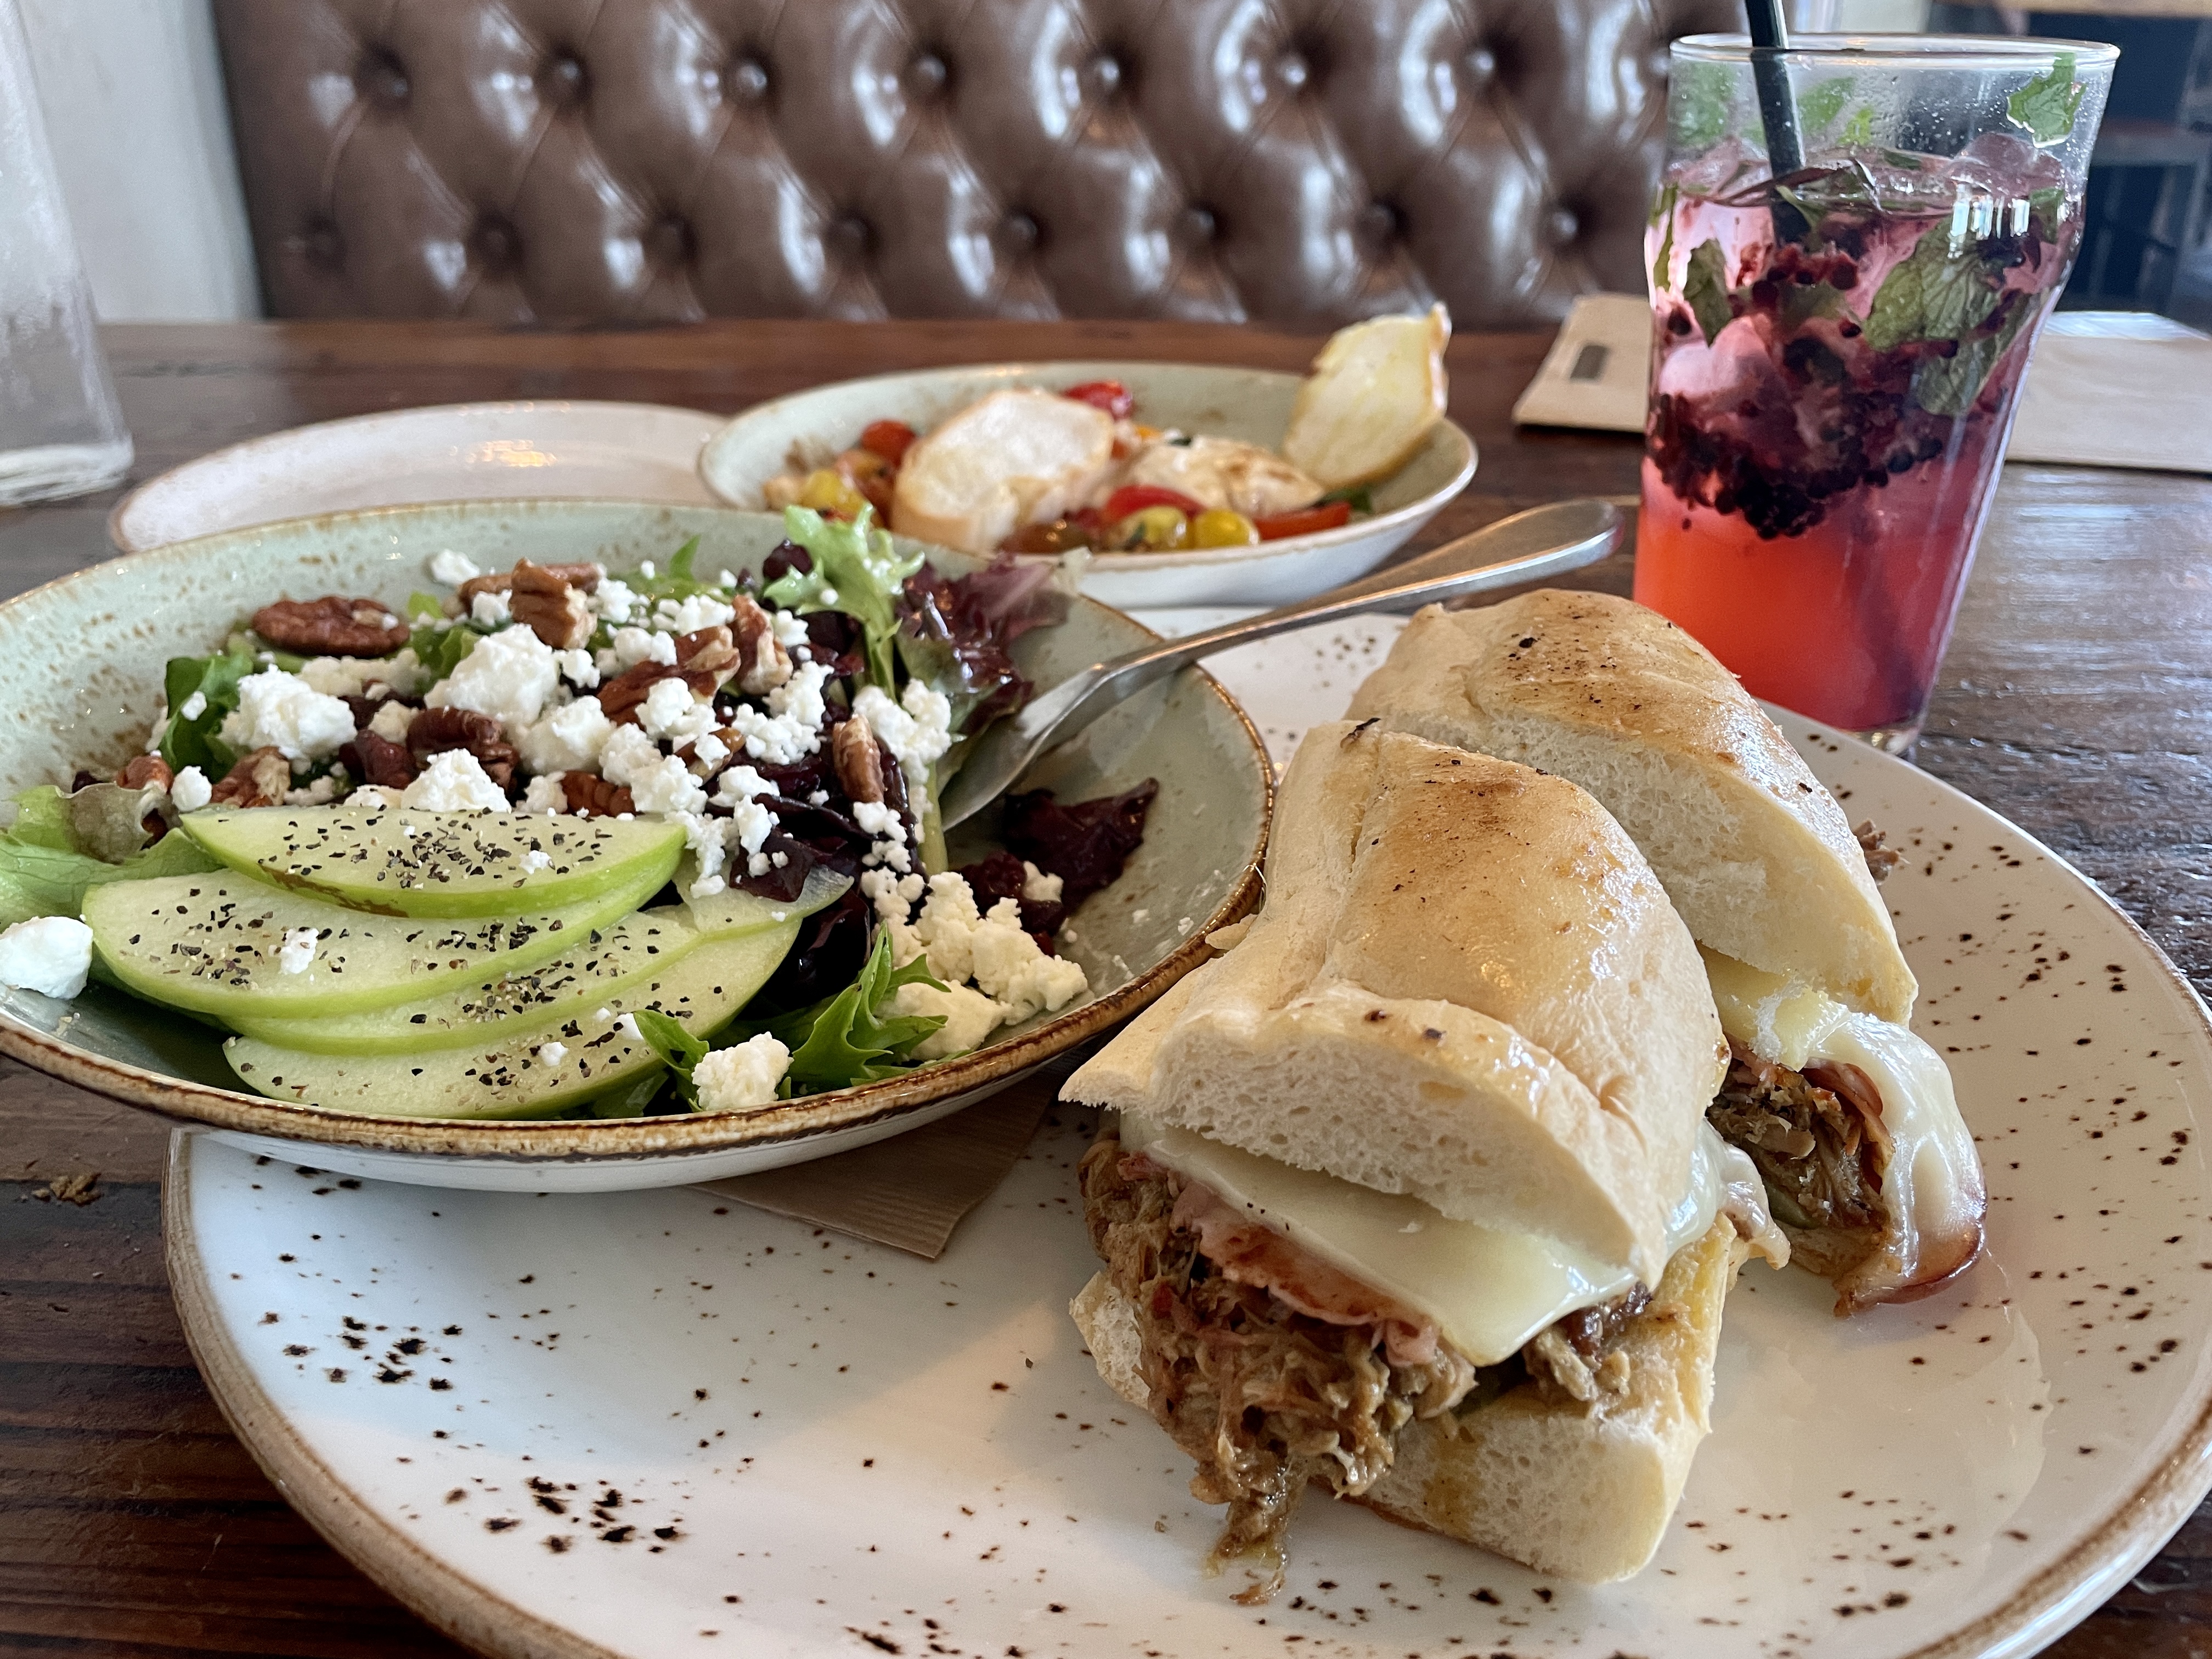 A plate holds a cuban sandwich with a small dish holding a salad next it it, which is covered with green apples, crumbled goat cheese, and dried cranberries. In the background are a water glass with a drink that holds smashed blackberries and a small plate of burrata, tomatoes, and bread.